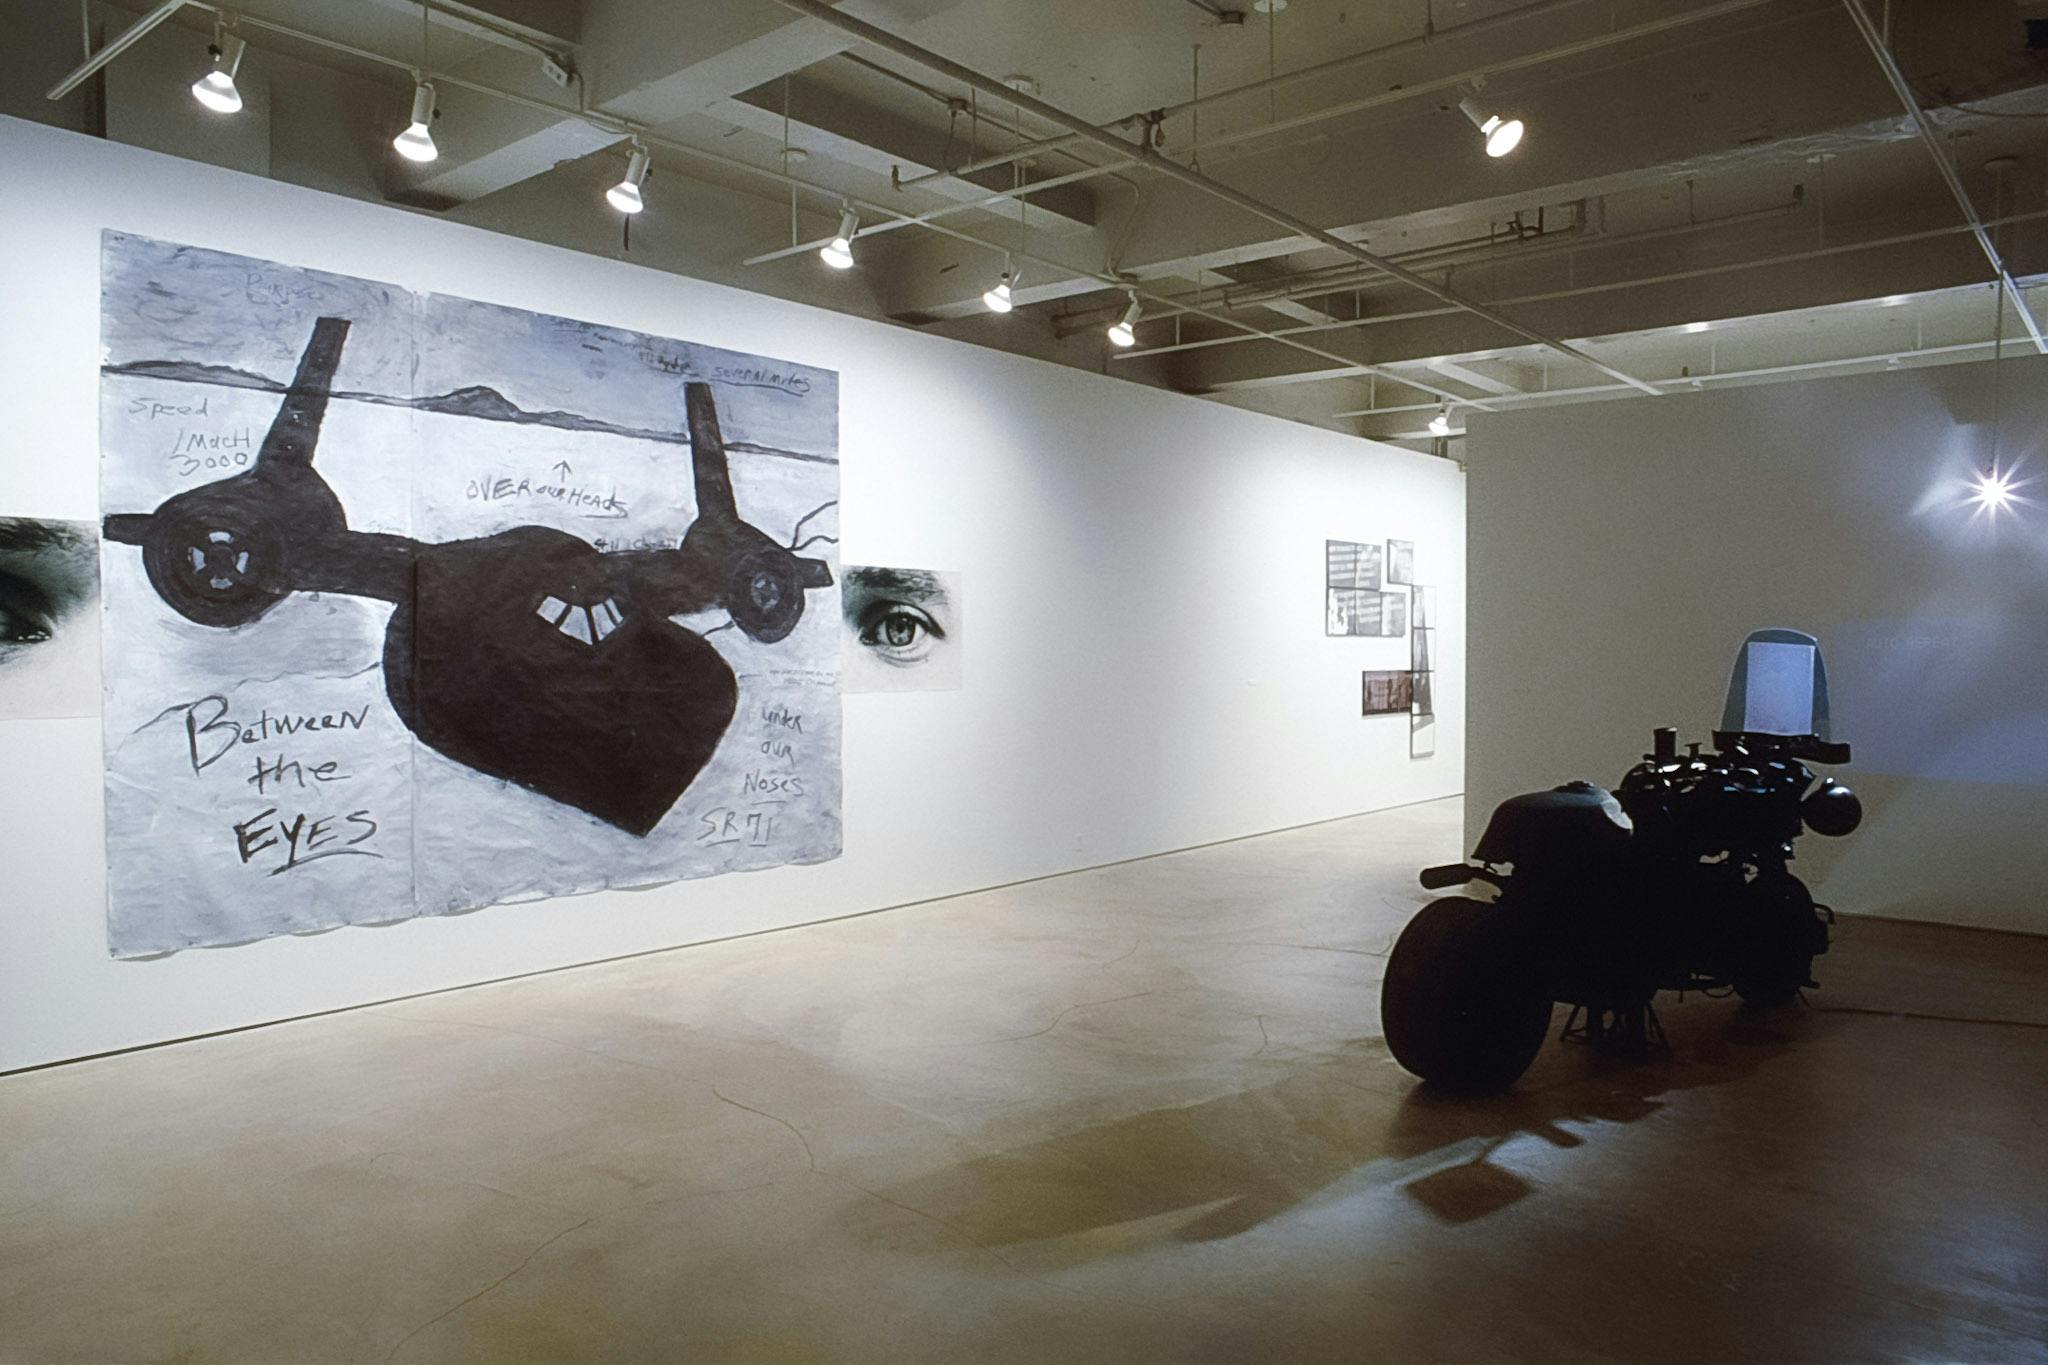 A large drawing is installed on the gallery wall next to the motorbike. A black airplane is depicted on the paper, which is placed in between a pair of photographs of human eyes.